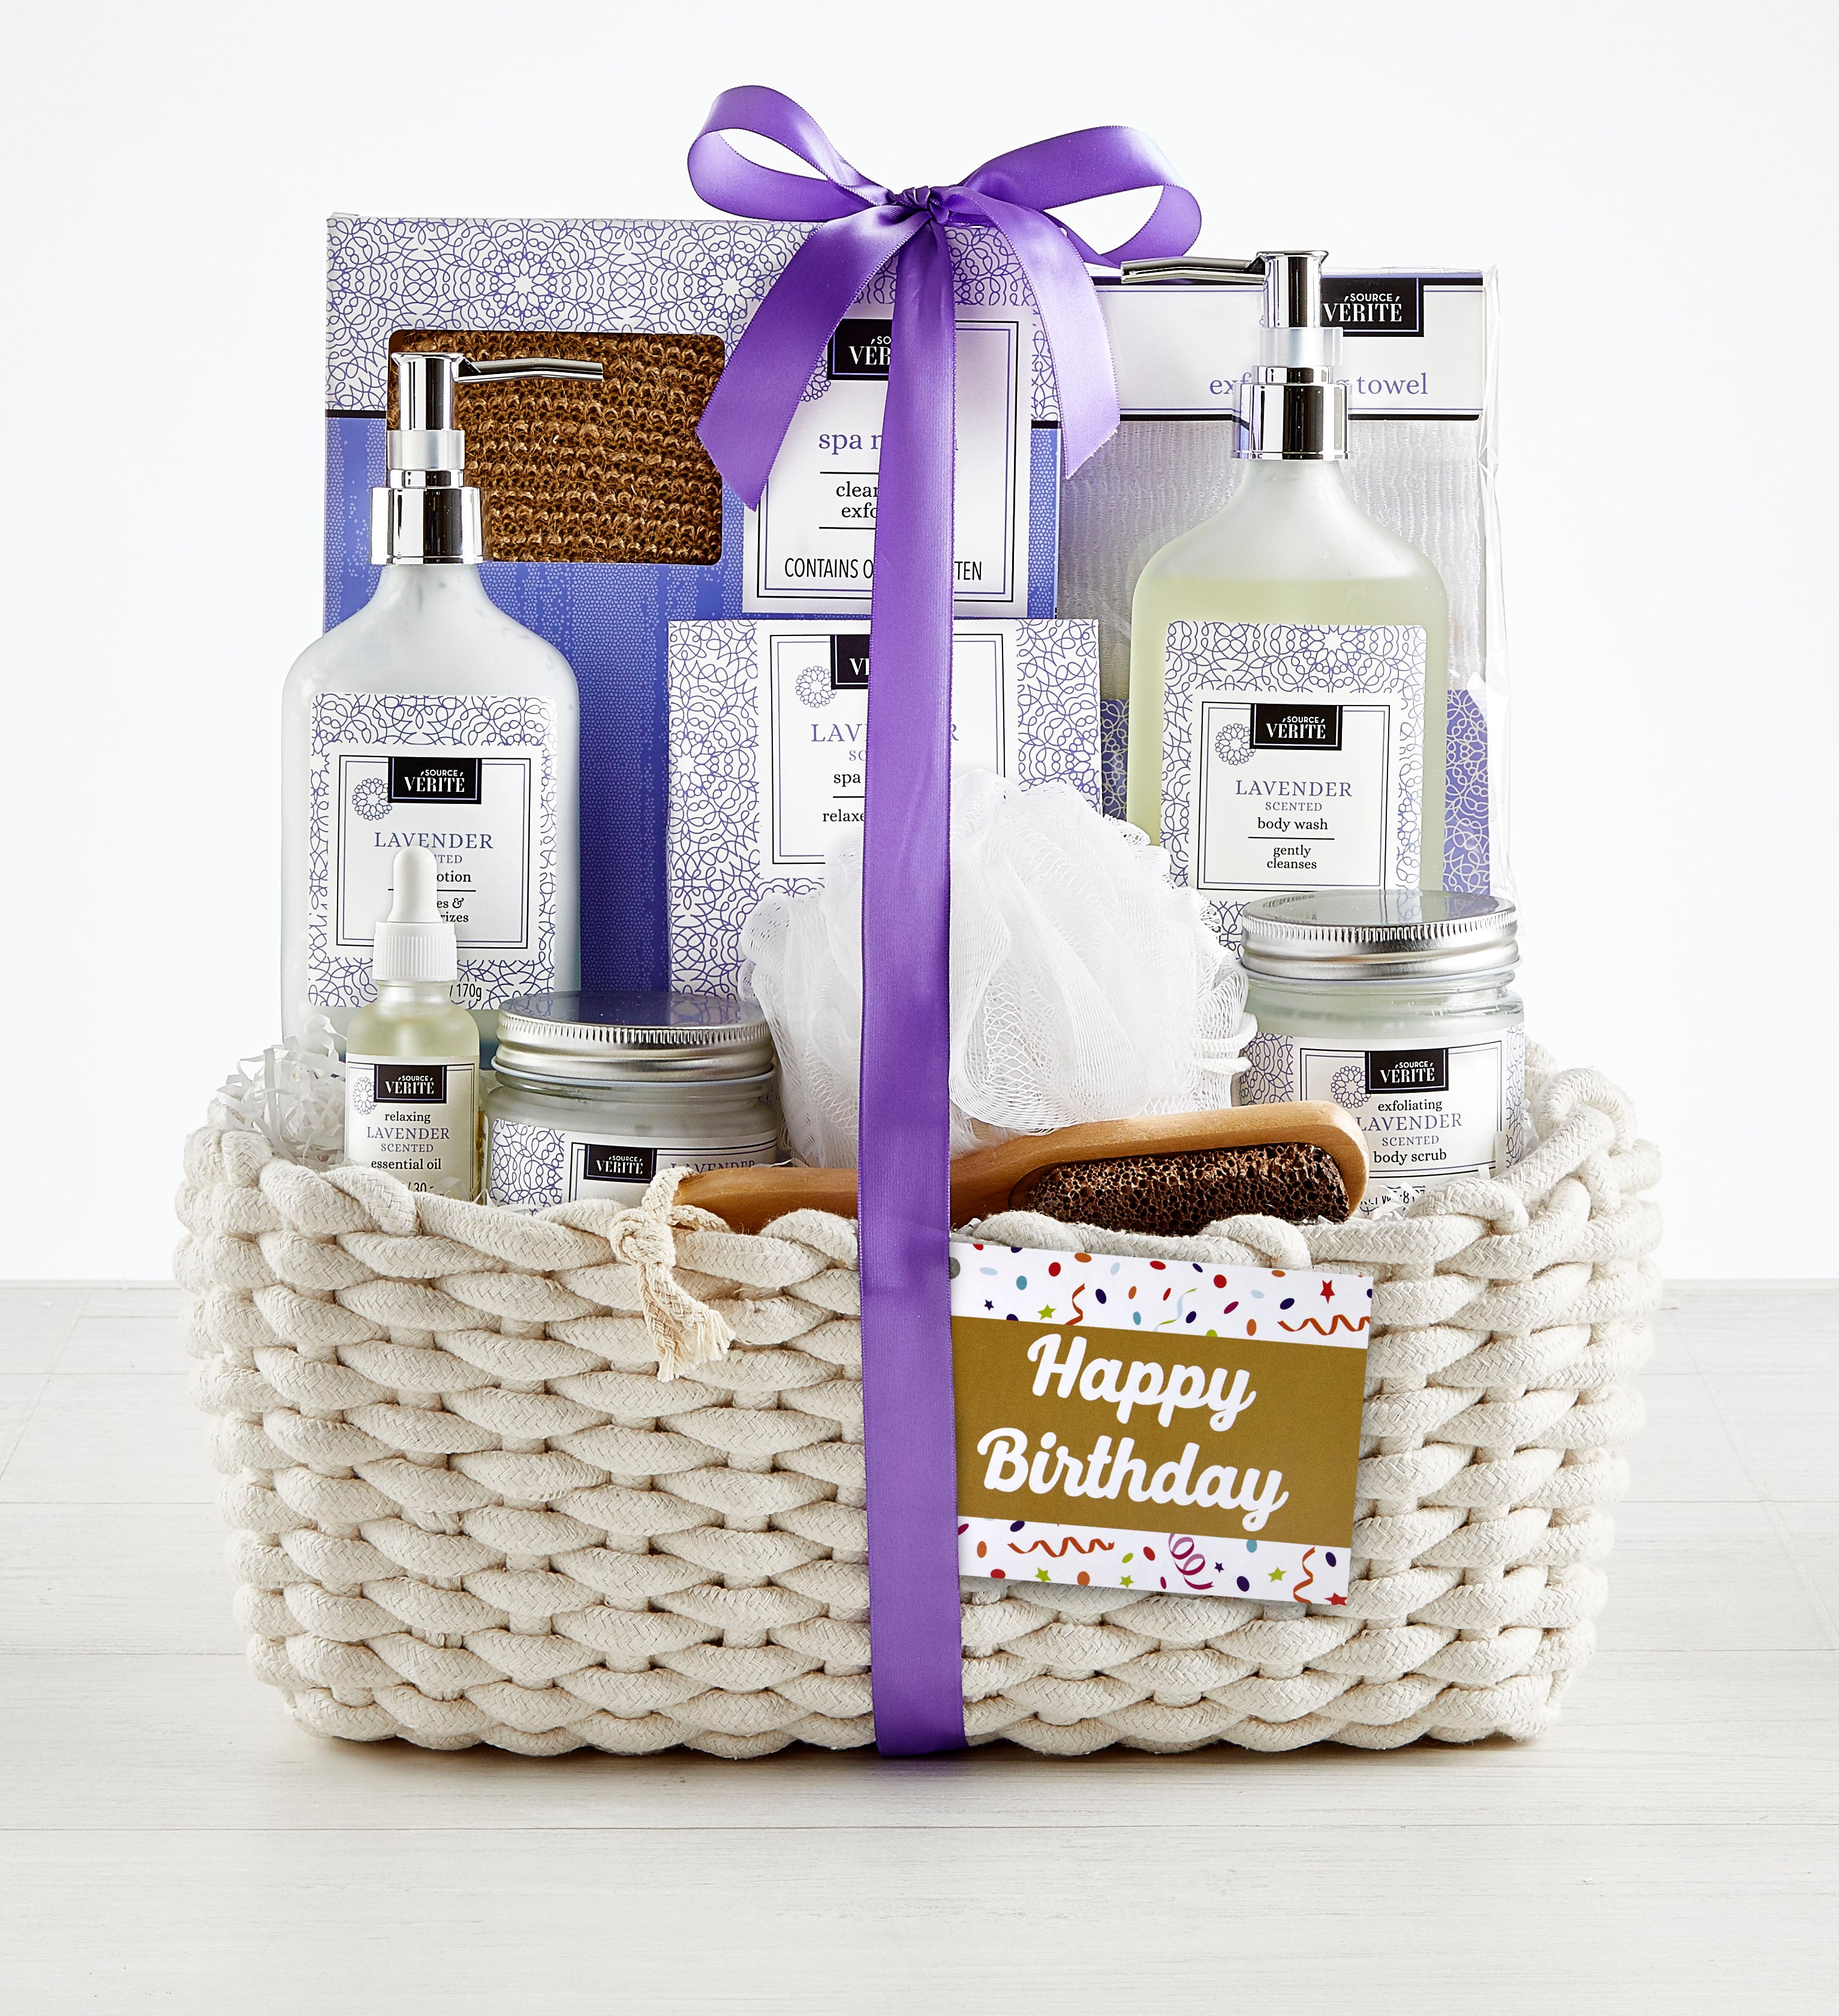 Amazon.com : Birthday Gifts for Women, Relaxing Spa Gift Box Basket for  Her, Pampering Gifts Thank You Gifts for Girls, Mom Wife Sister Best Friend  Unique Happy Birthday Bath Set Gift Ideas :